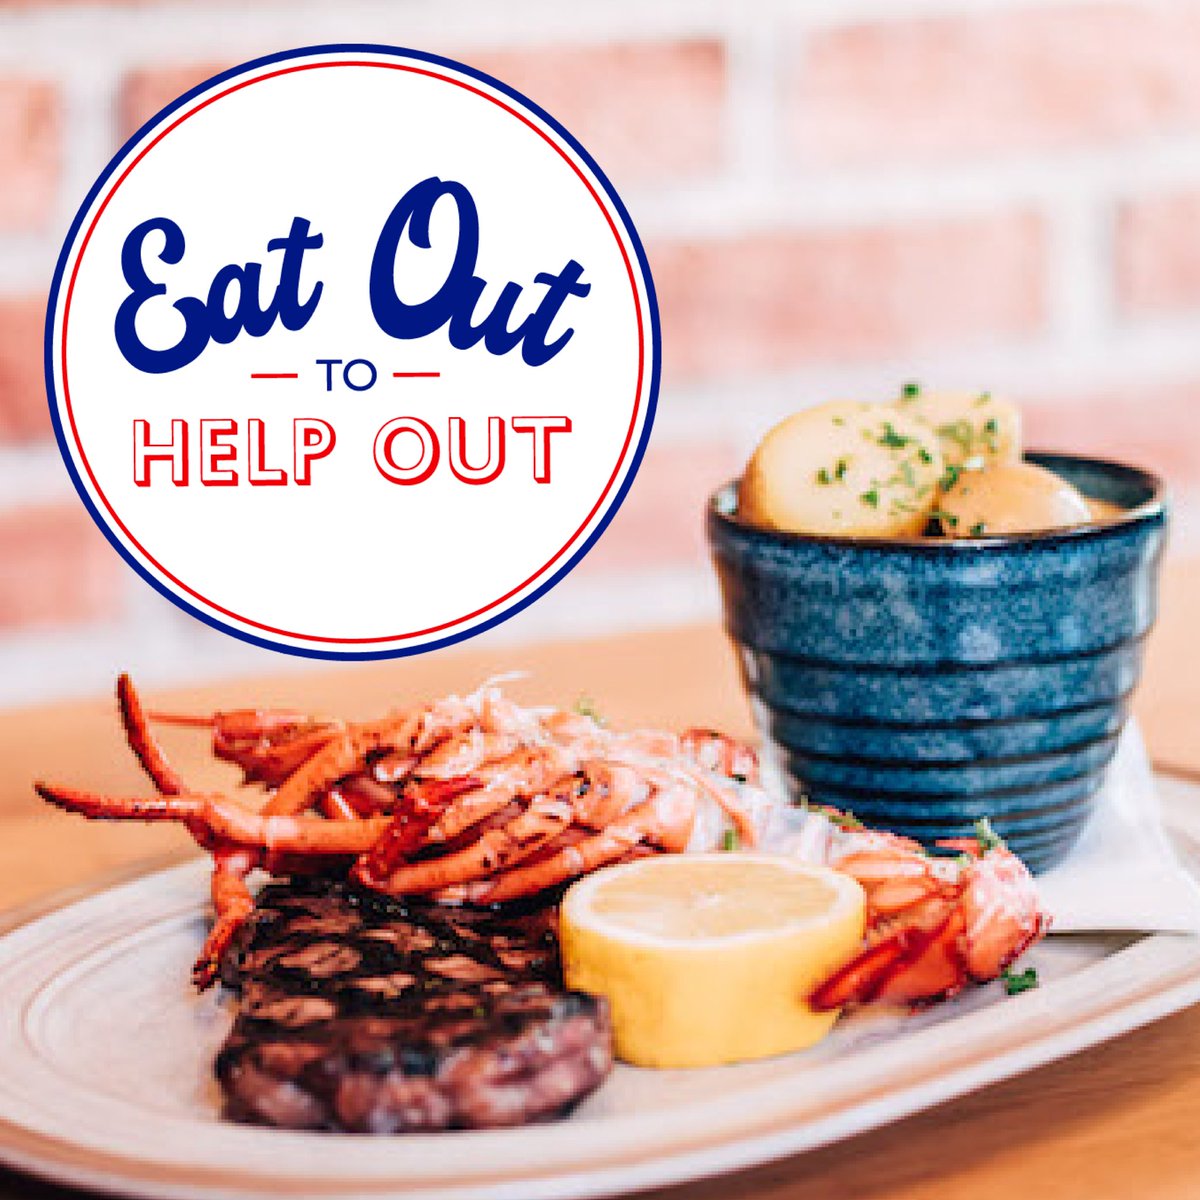 We will be taking part in the #EatOutToHelpOut scheme, but what does that mean for you? On Mondays, Tuesdays and Wednesdays from 3rd to 29th August there will be 50% off food and non-alcoholic drinks up to the value of £10 per person. This includes all our meals and set menus!